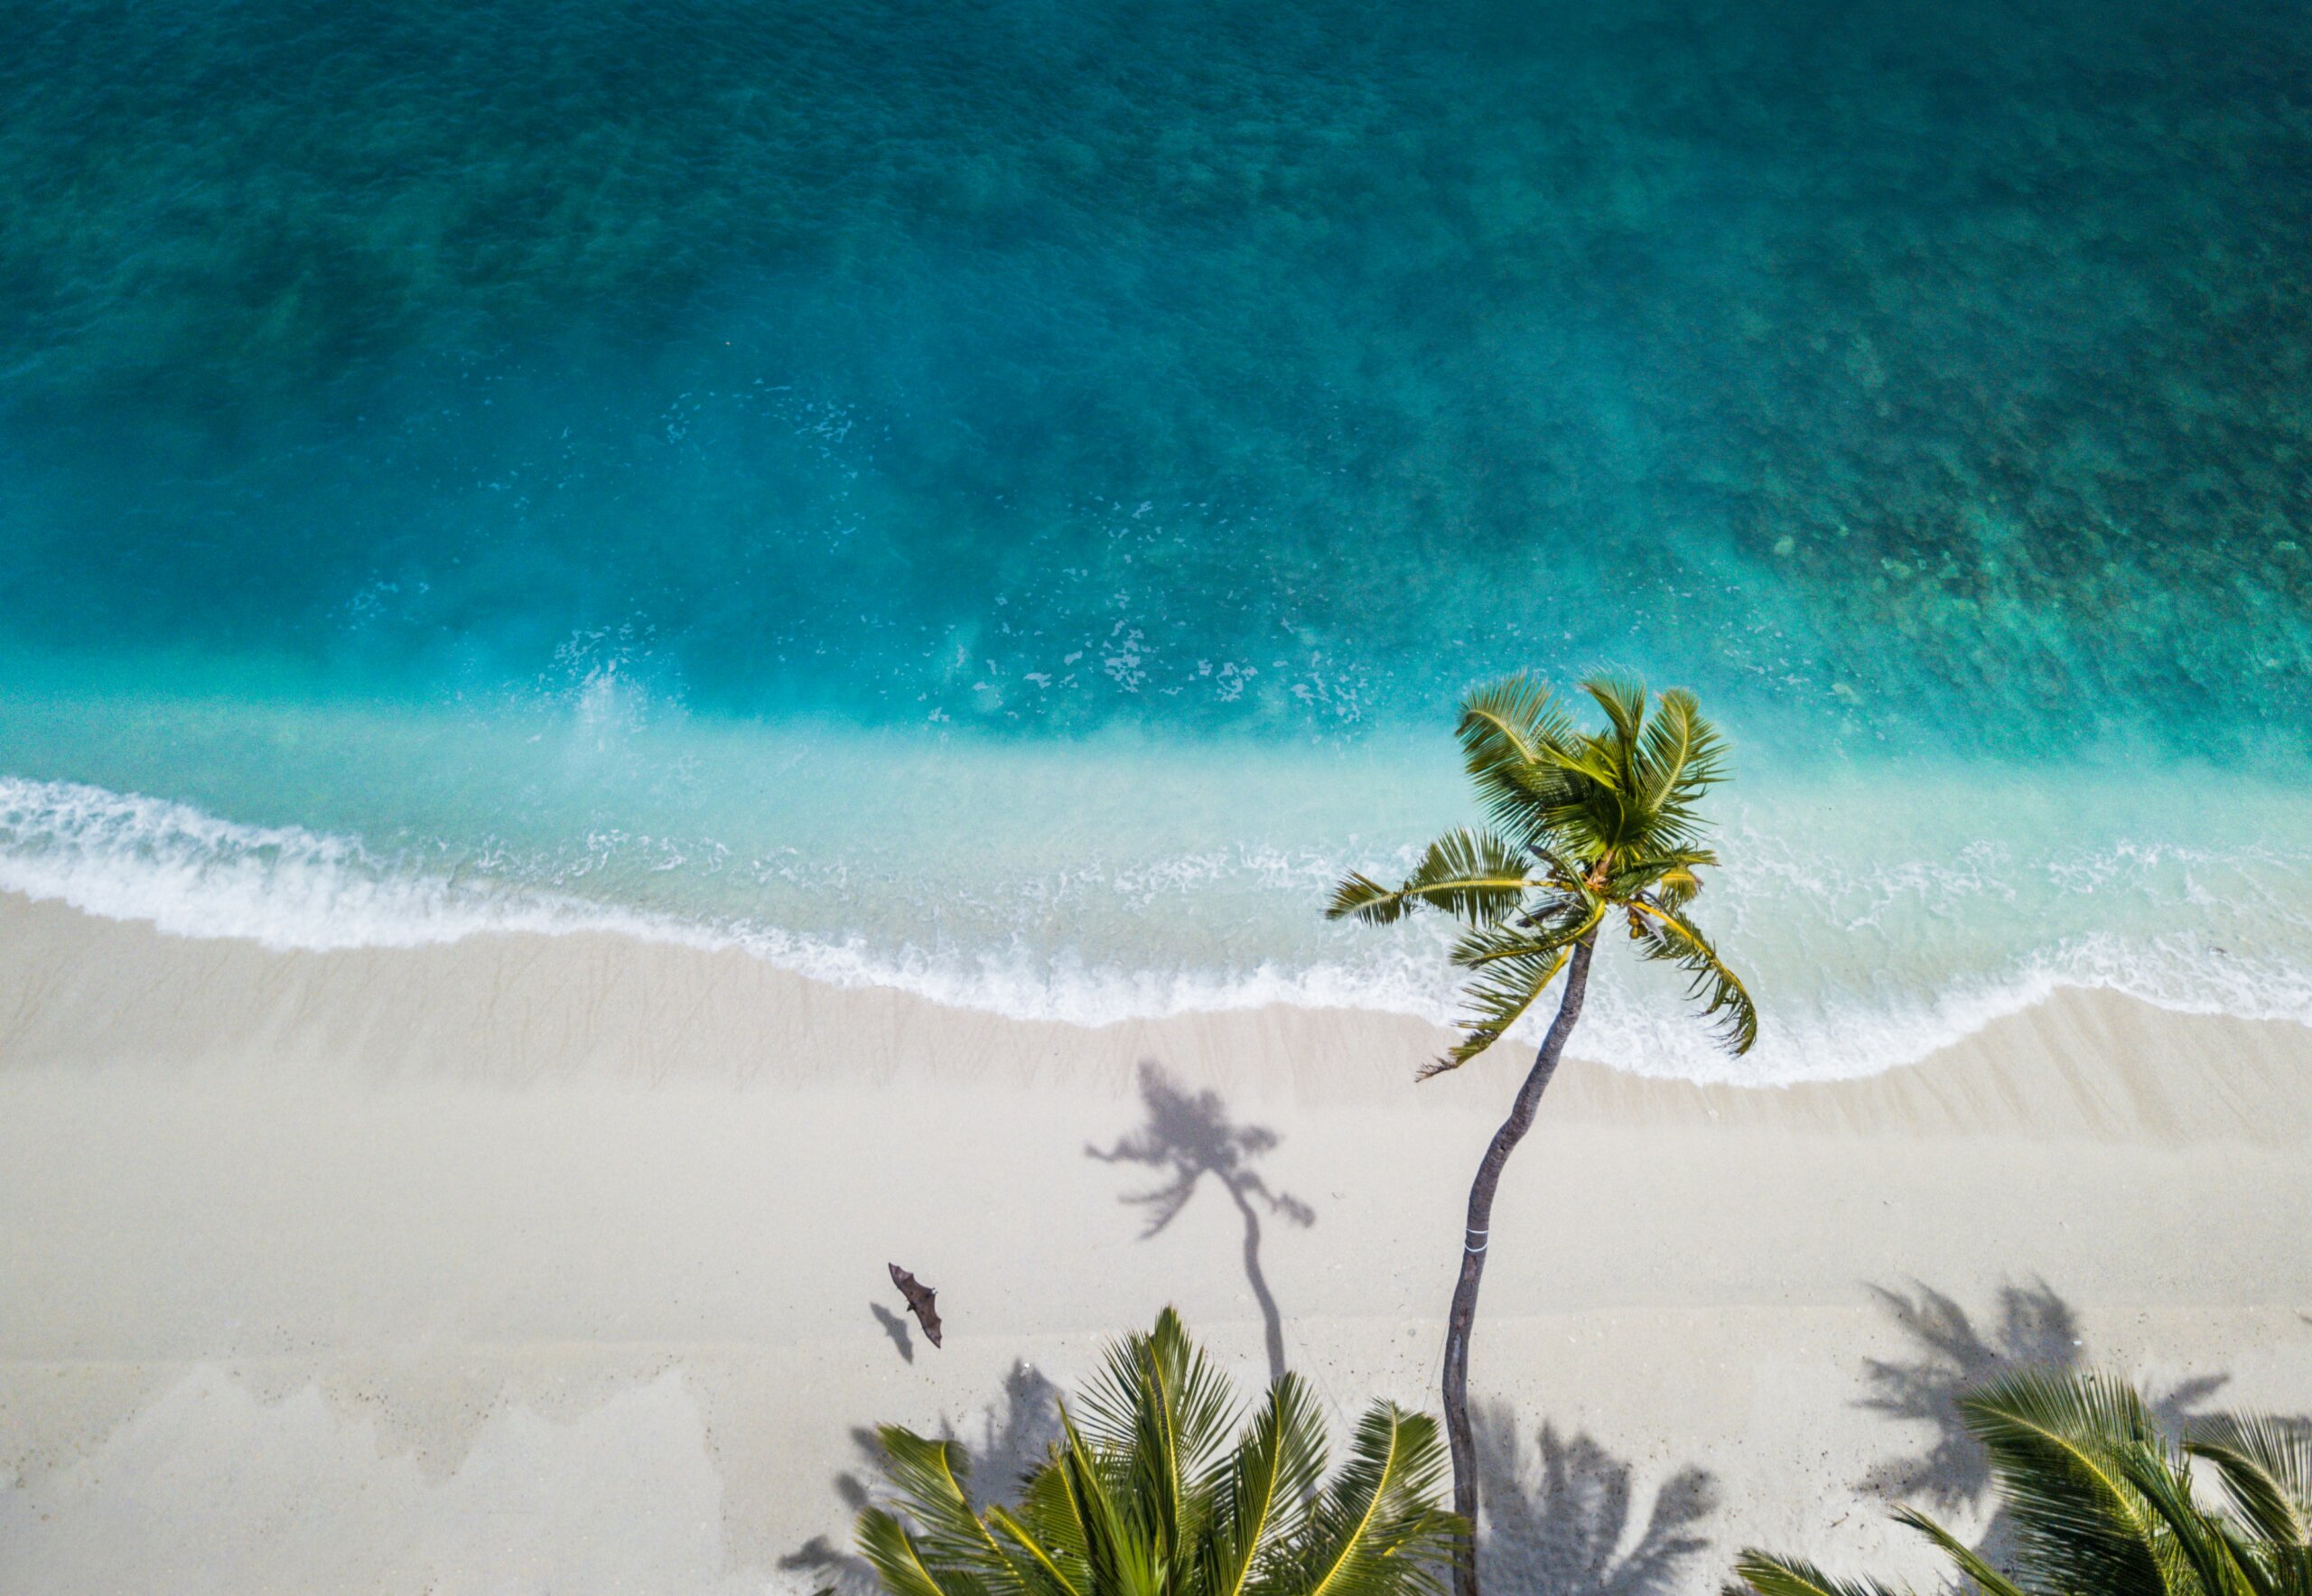 Sandy beach, palm trees, and blue water.